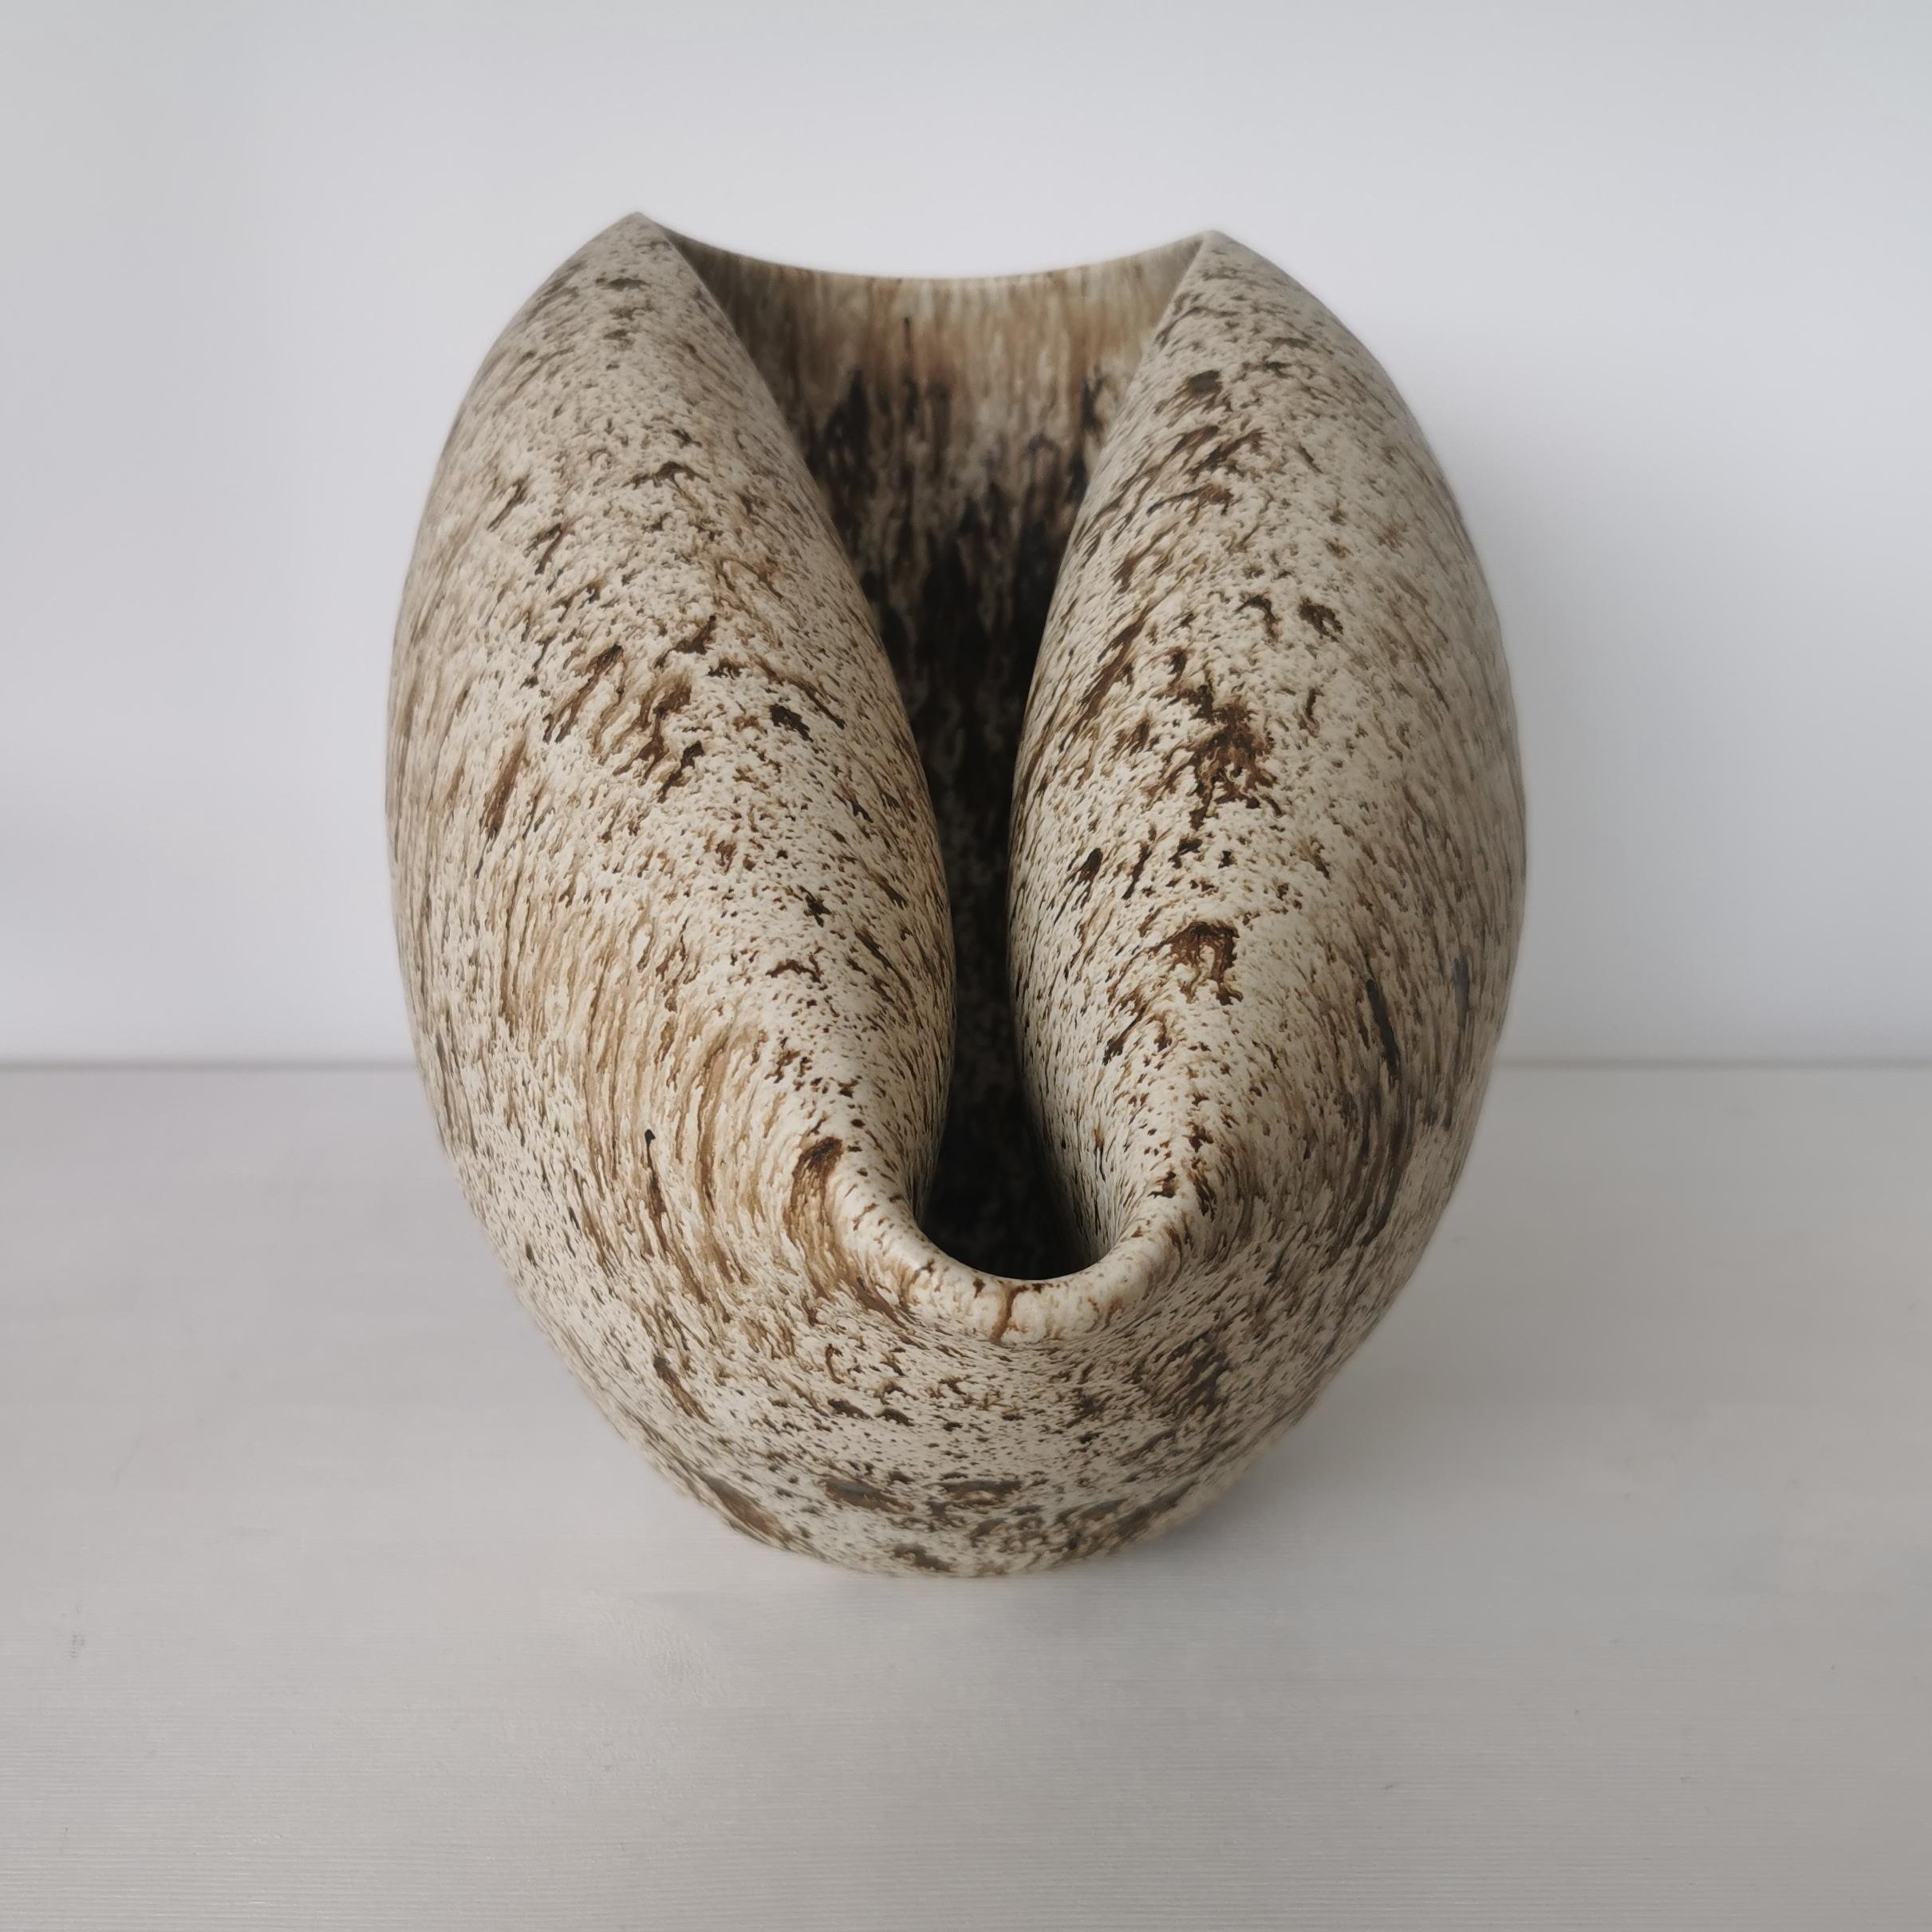 Contemporary Oval Form with White and Brown Speckled Glaze, Vessel No.99, Ceramic Sculpture For Sale